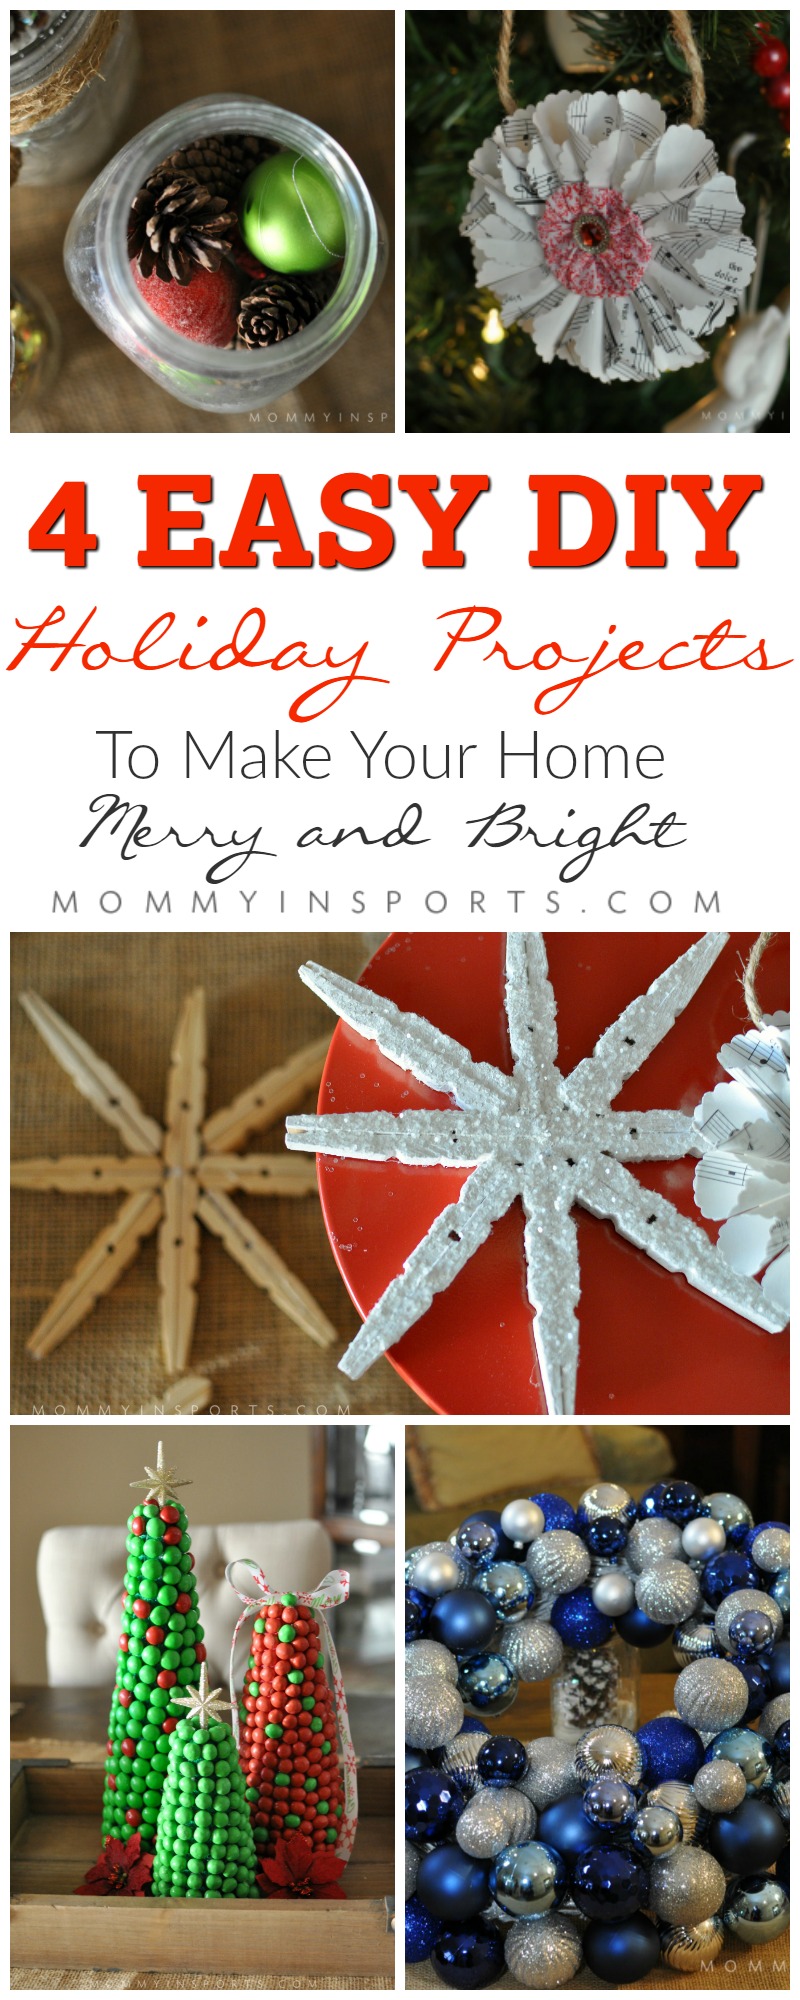 Looking for some cute holiday decor ideas that won't break the bank? Try one of these 4 Easy DIY Holiday Projects! Your home will be merry & bright!